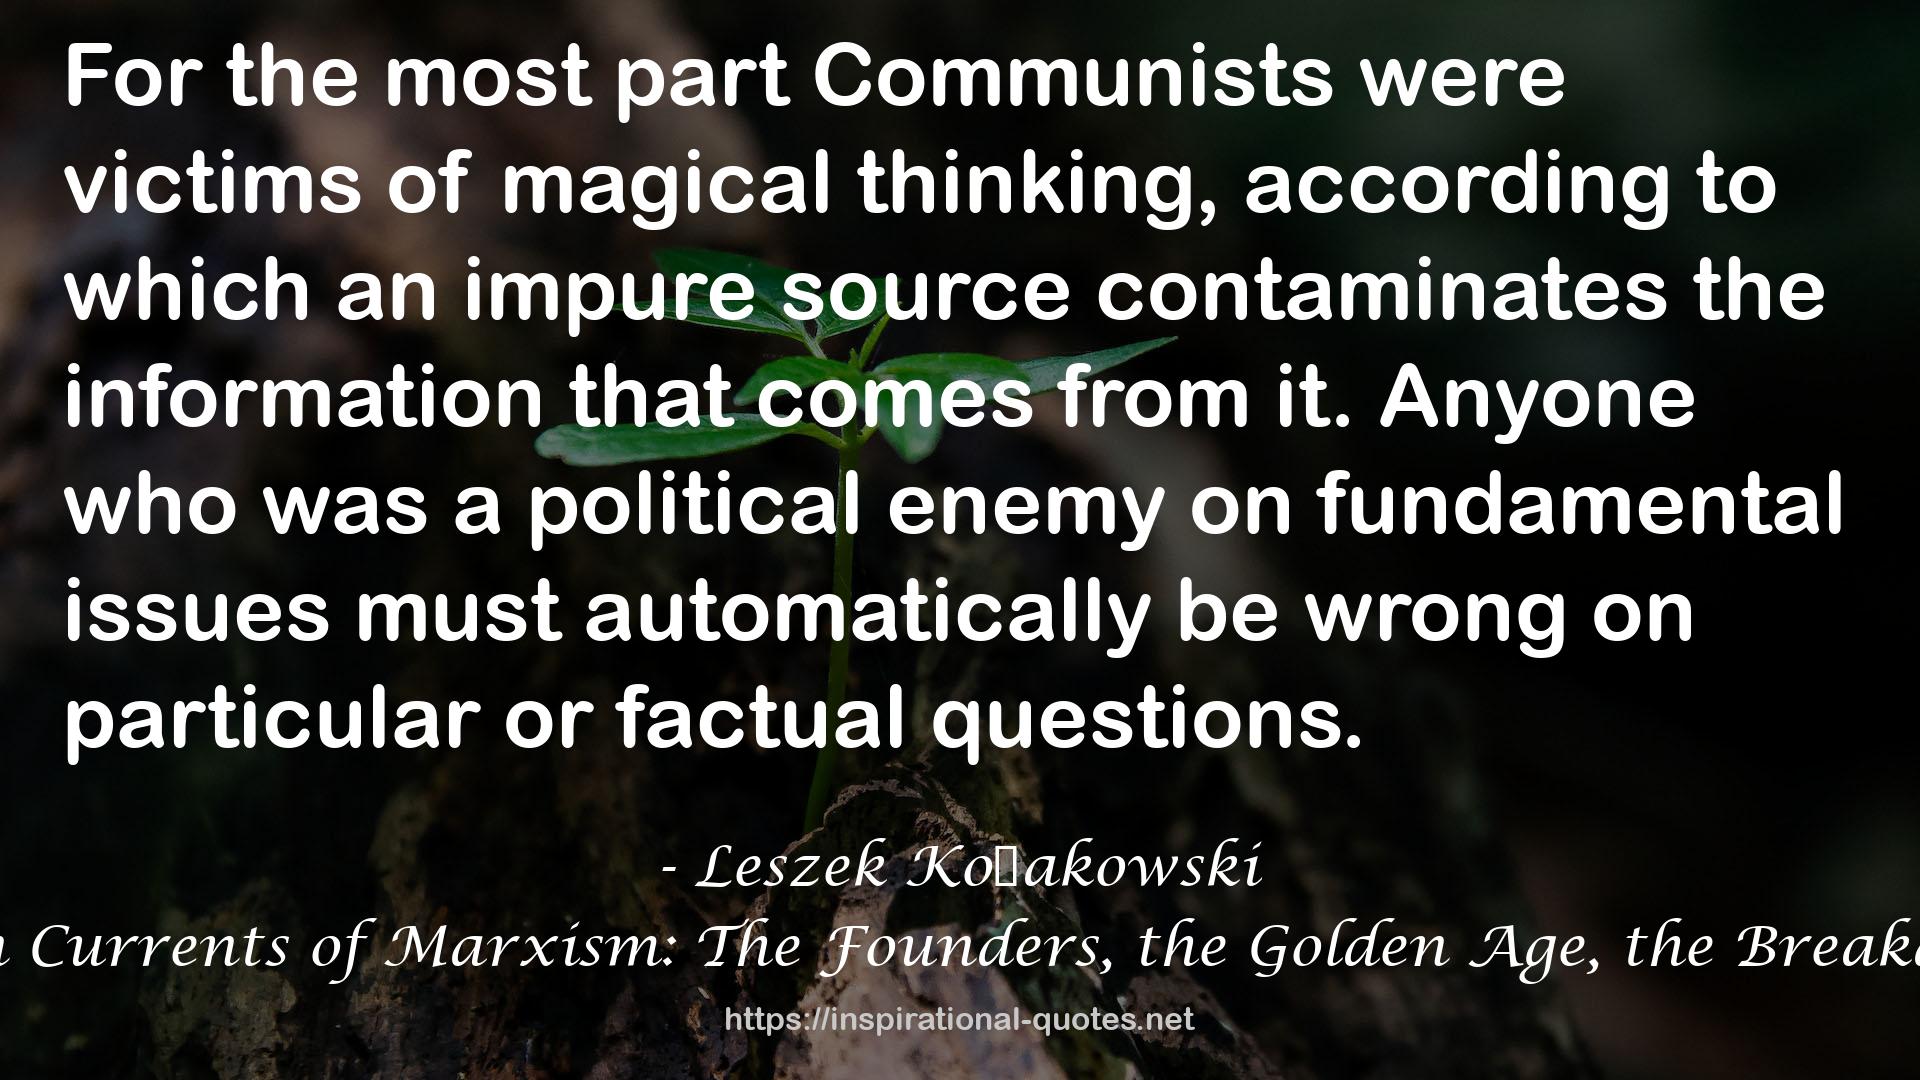 Main Currents of Marxism: The Founders, the Golden Age, the Breakdown QUOTES